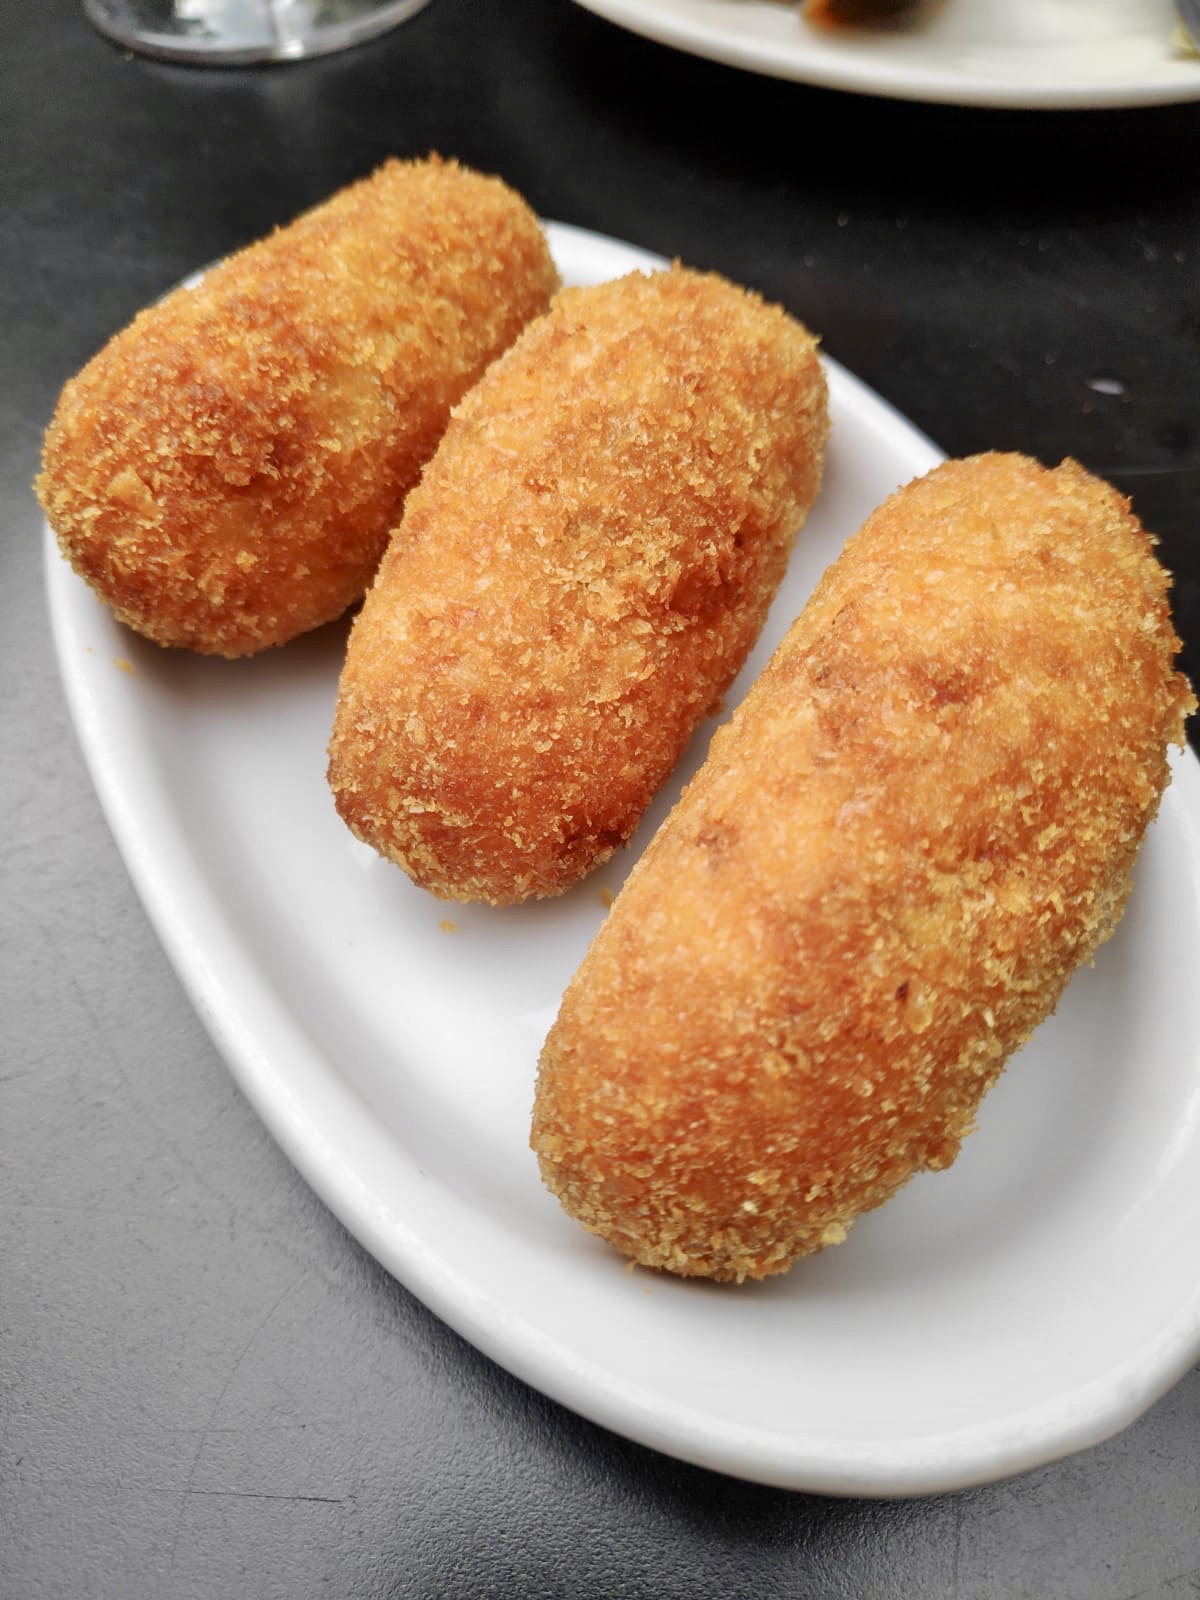 Spanish croquettes are just to delicious!